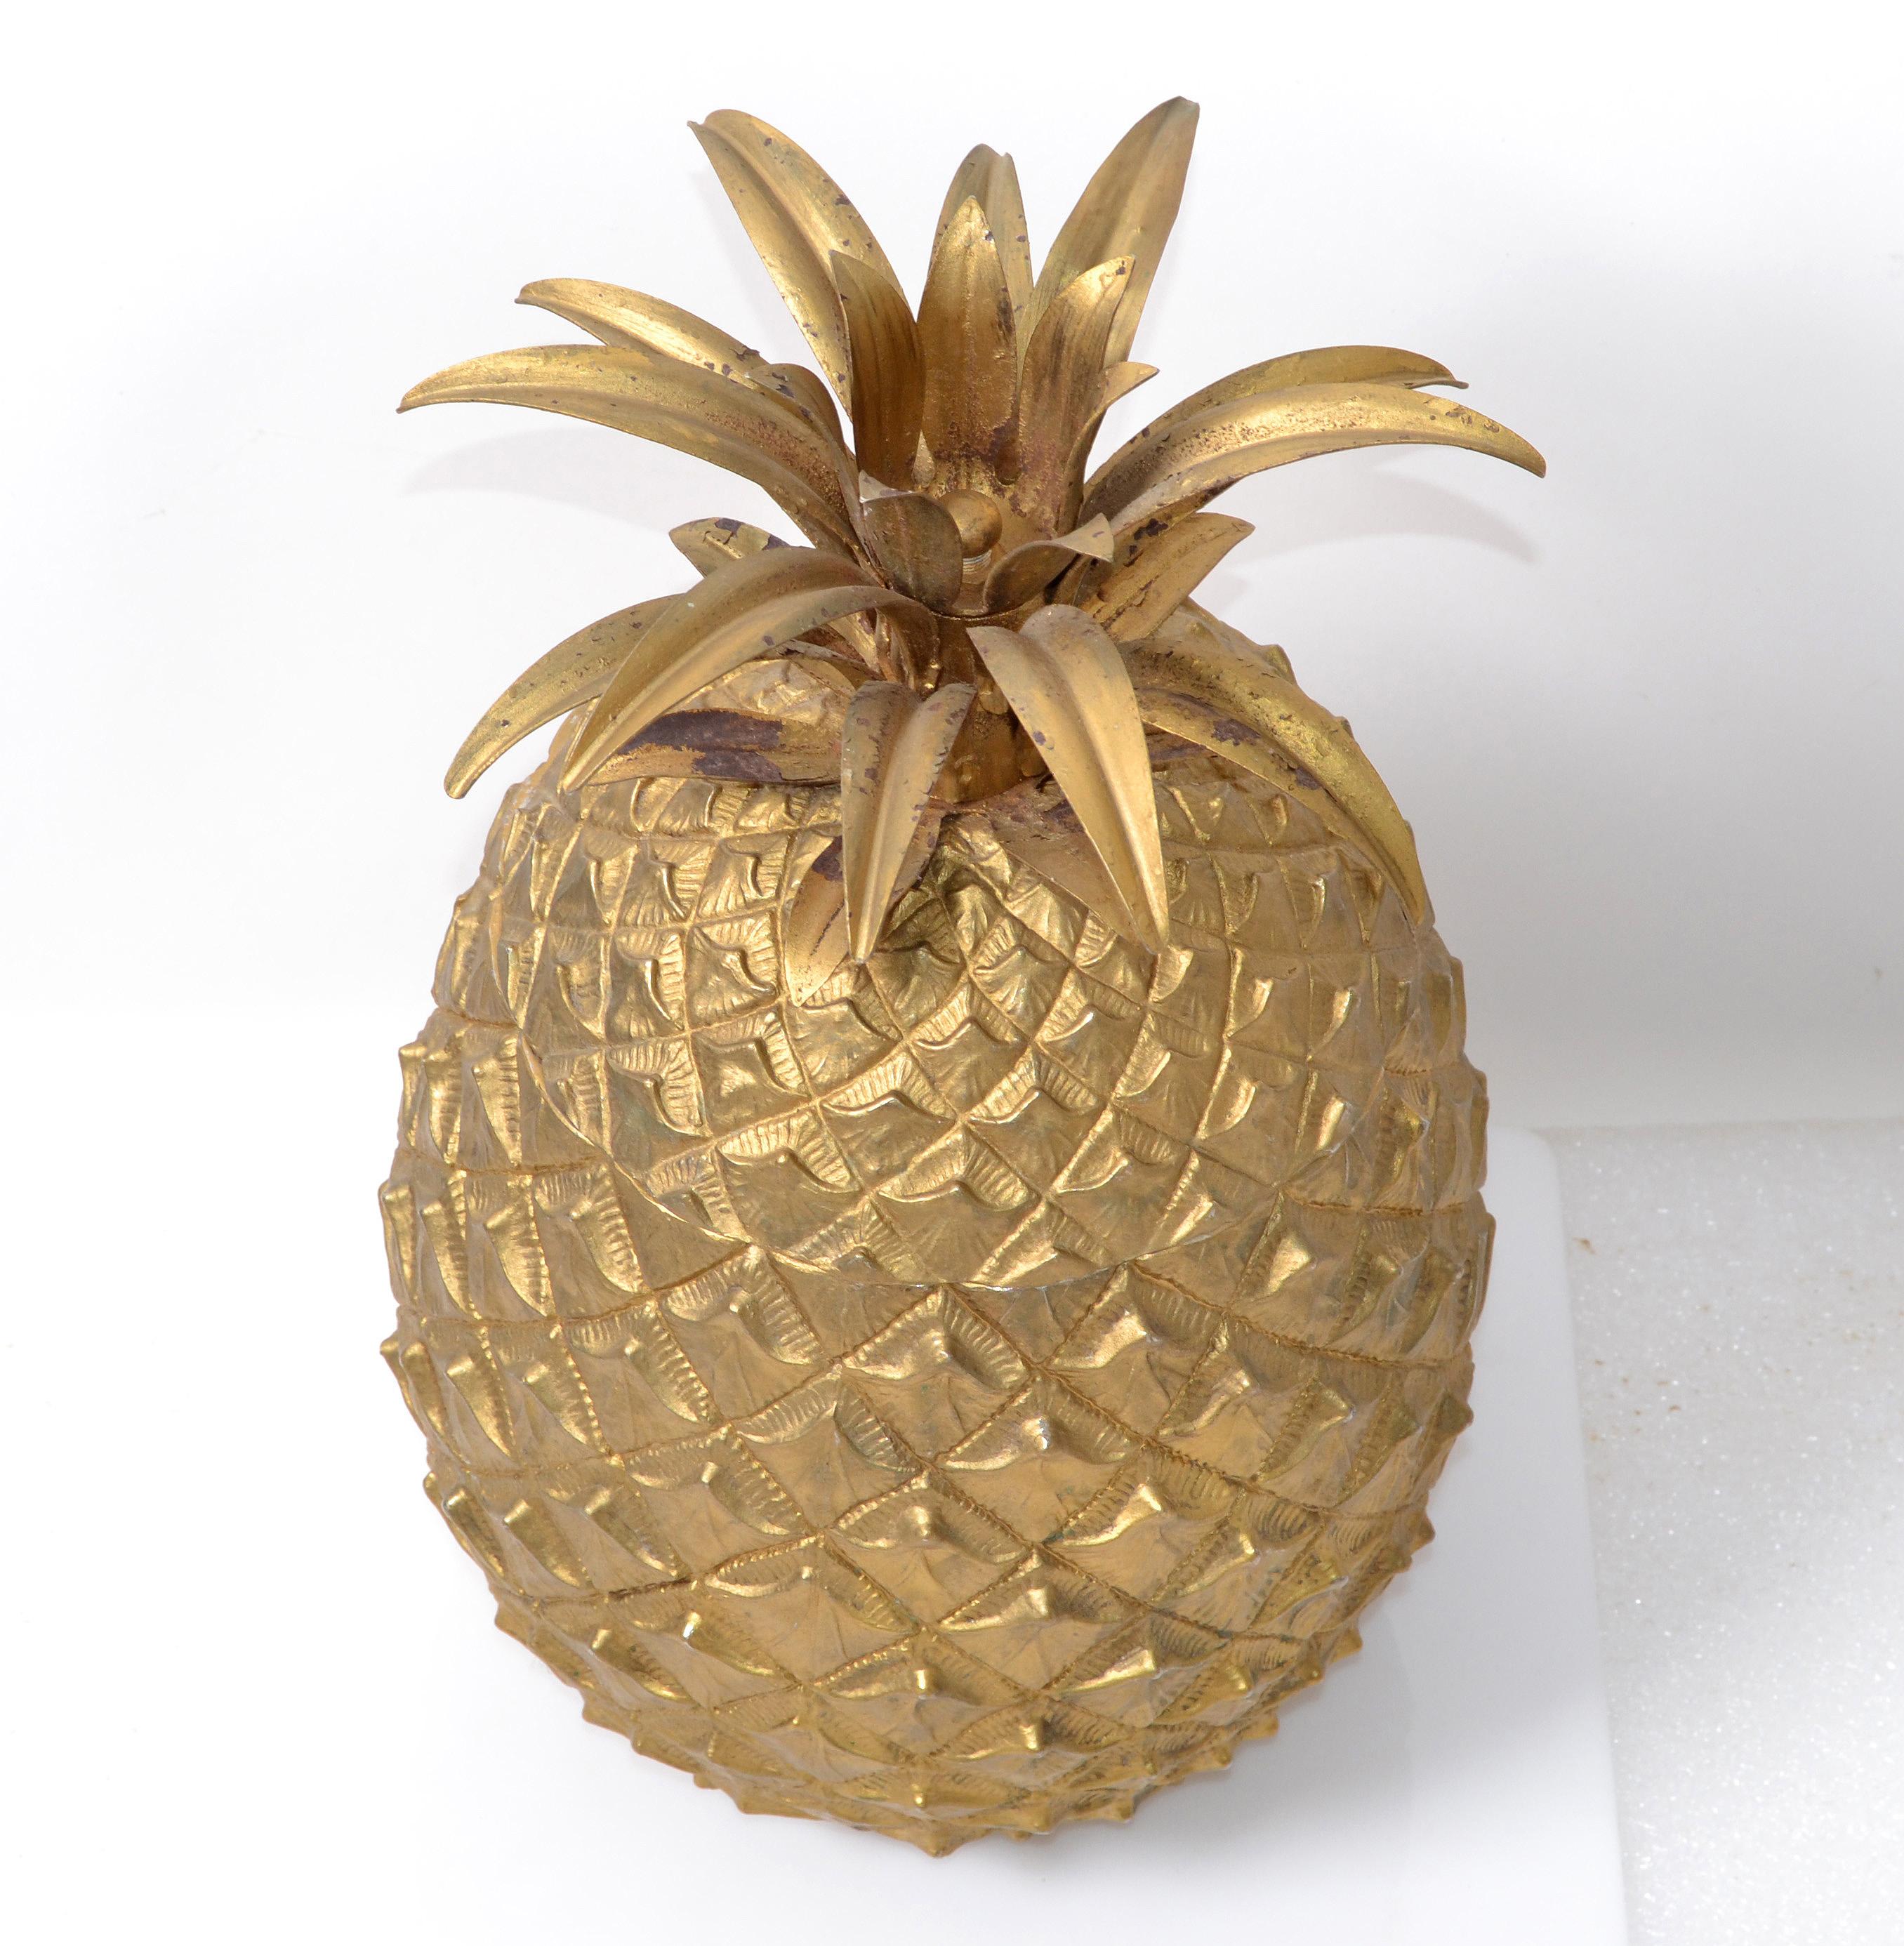 Hand-Crafted Large Mauro Manetti Gold Plate Pineapple Ice Bucket Mid-Century Modern, Italy